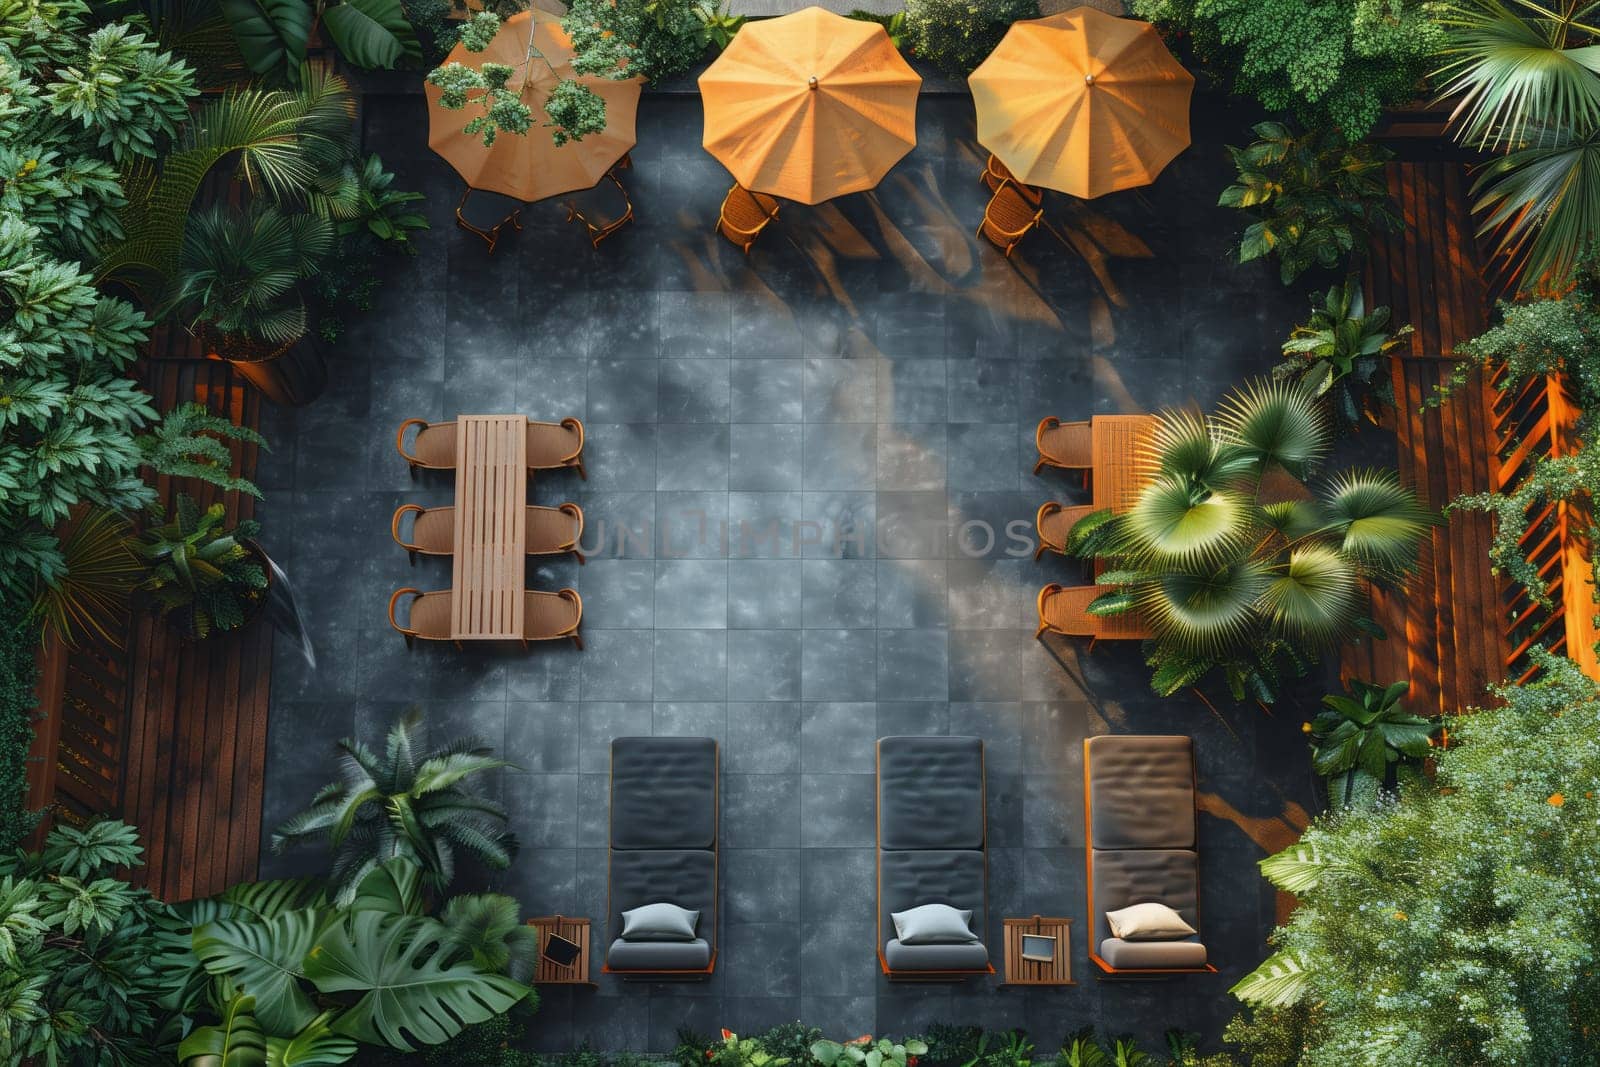 An aerial view of a patio set with tables, chairs, umbrellas, and plants creating a beautiful outdoor landscape with a mix of nature and manmade elements